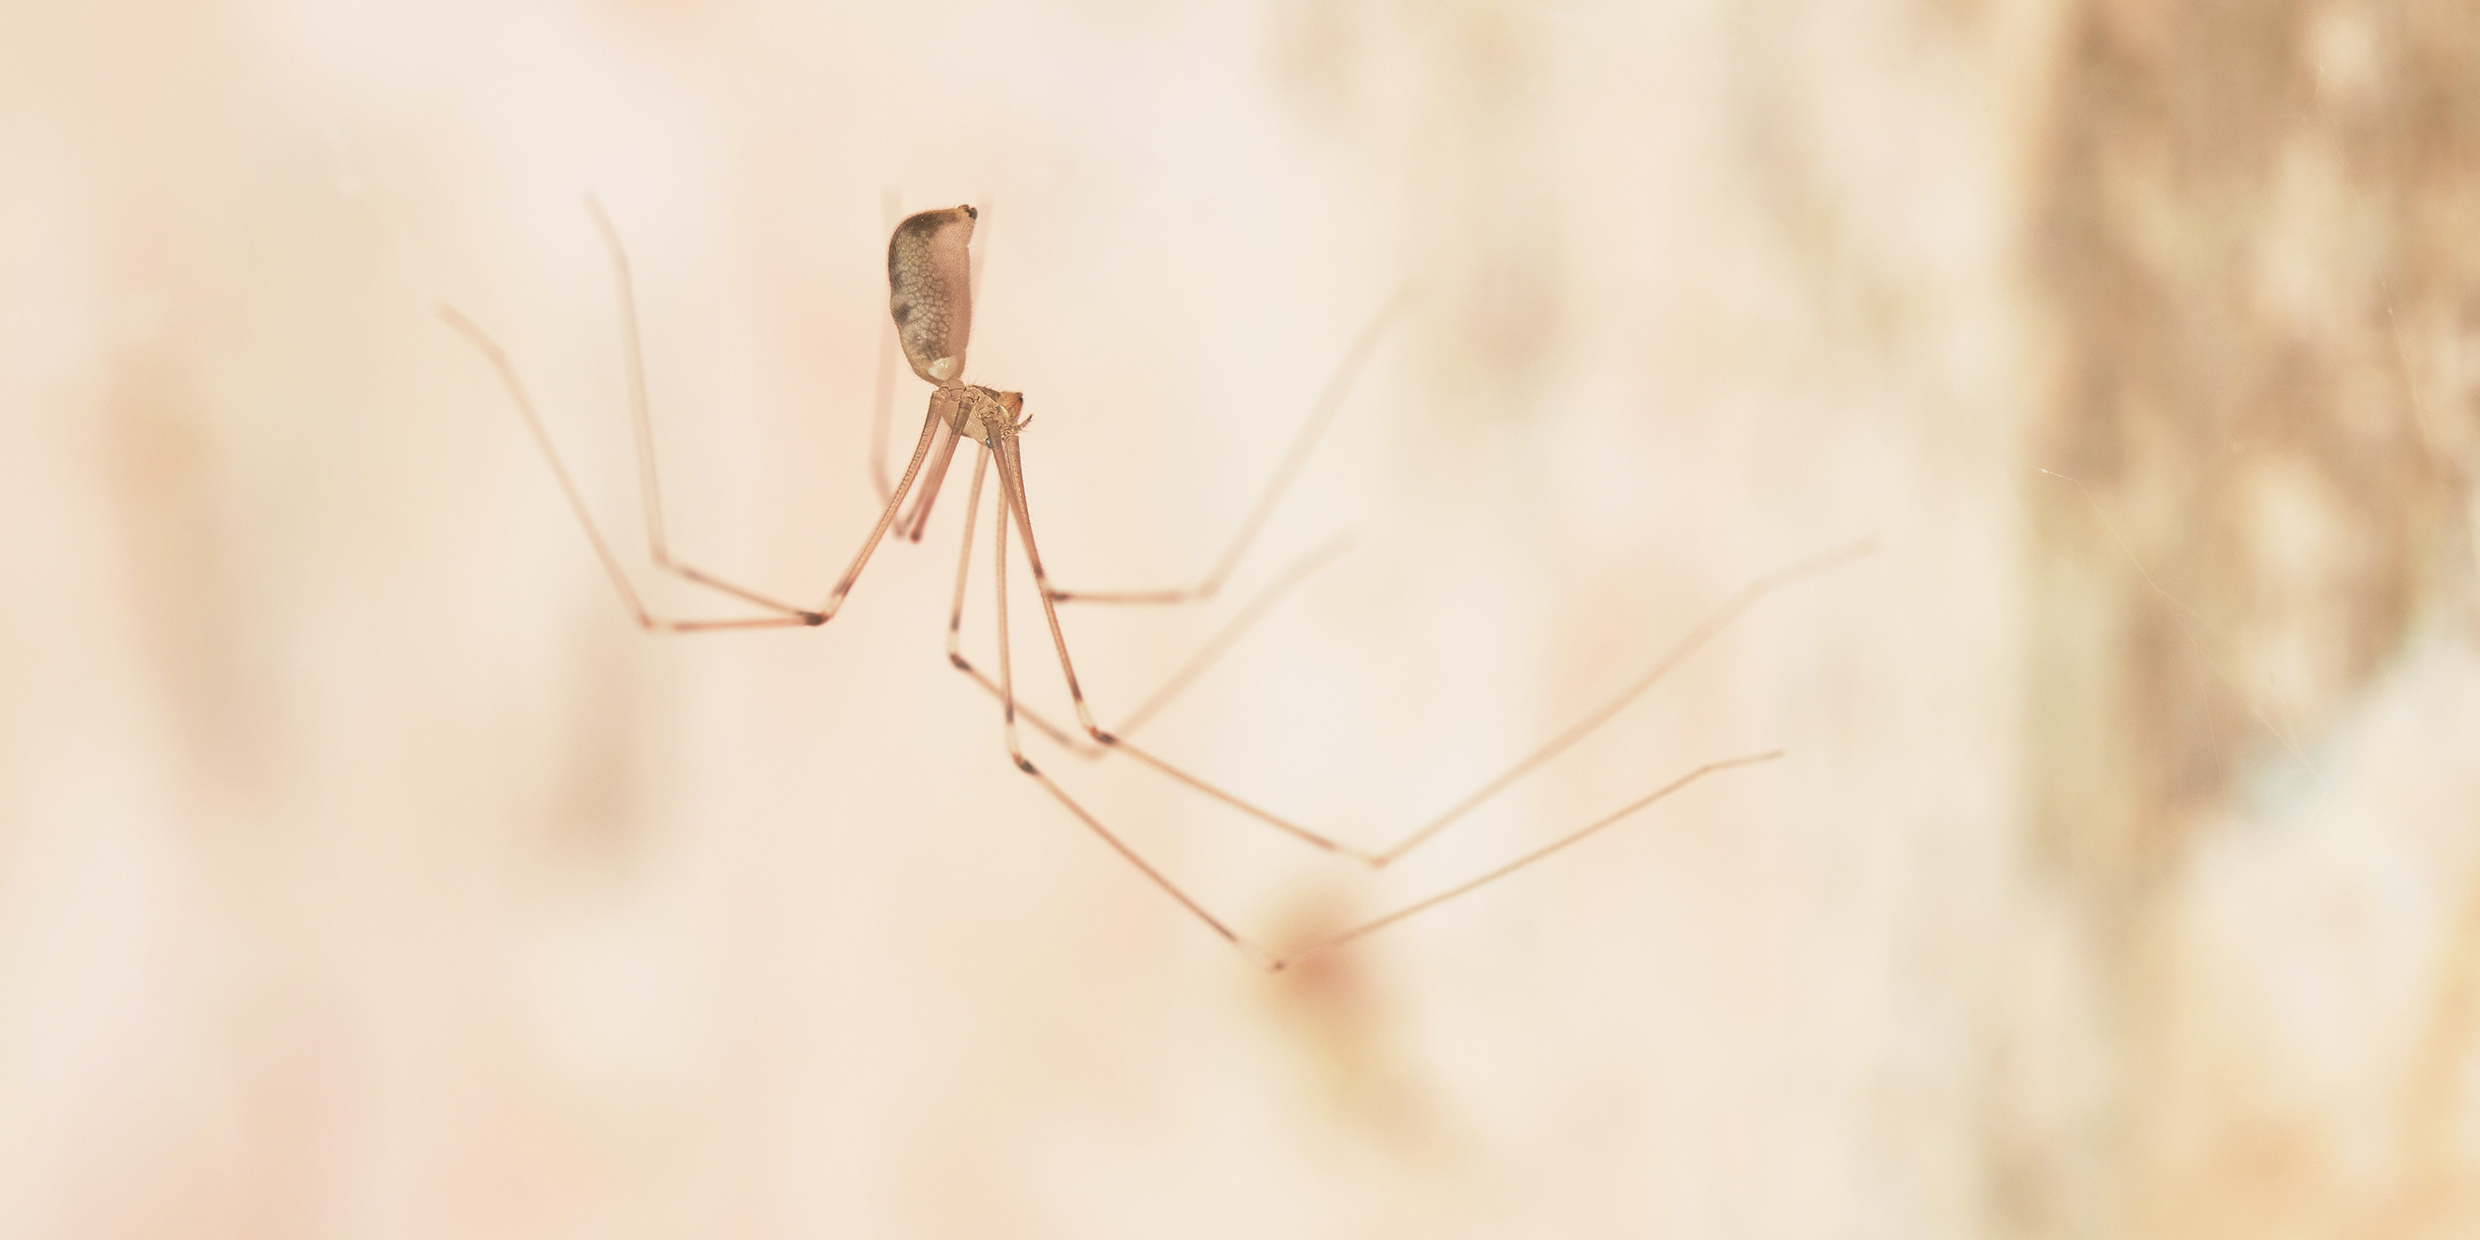 Daddy long legs spider with babies, I assume this is the mo…